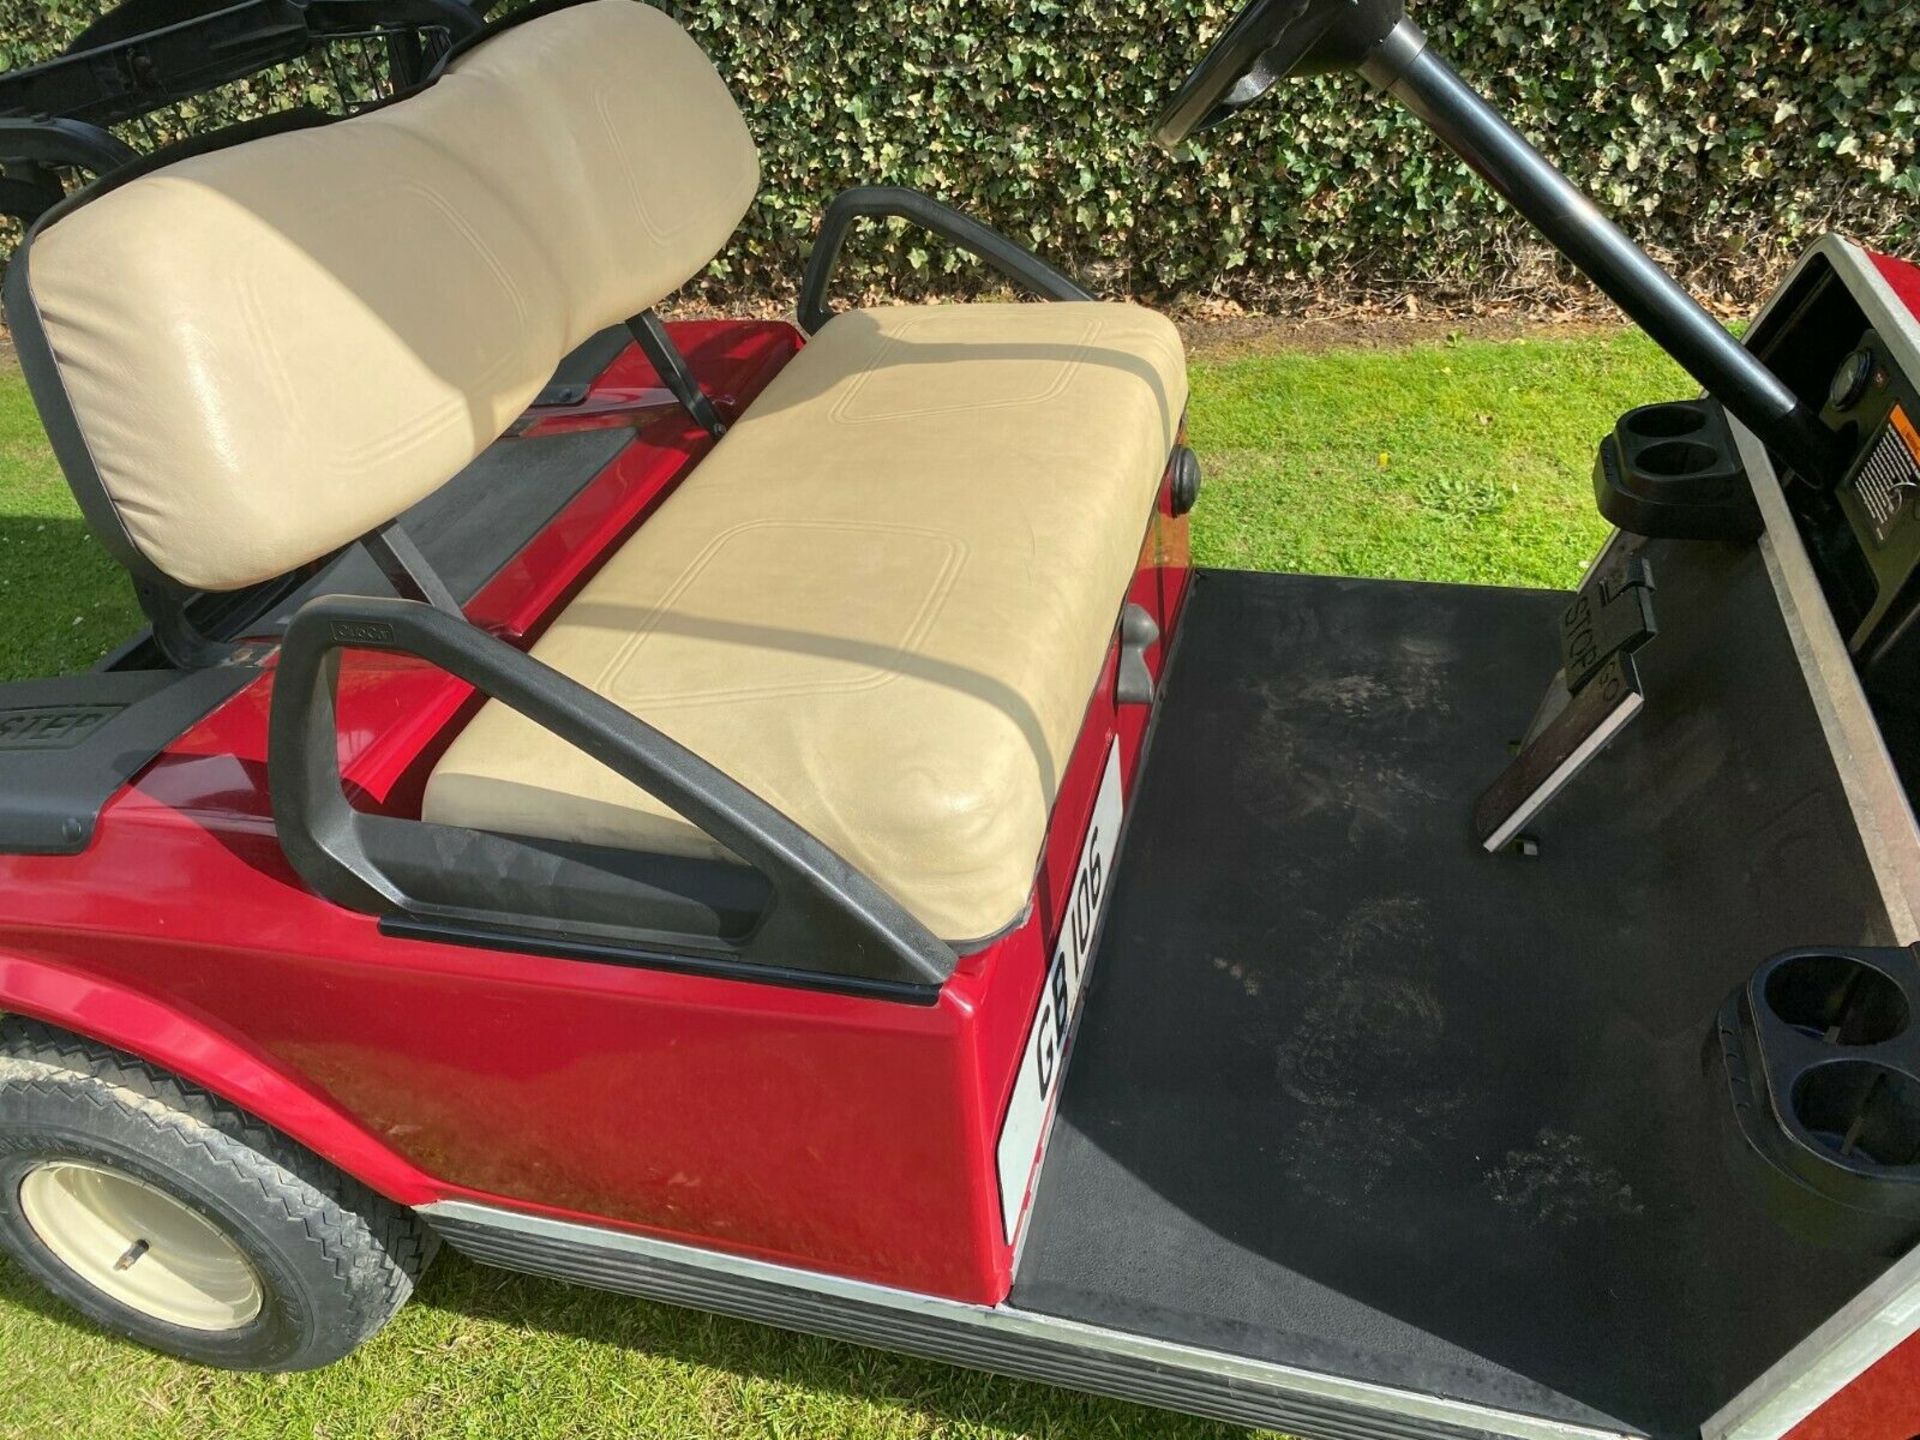 CLUB CAR GOLF BUGGY, 1 OWNER FROM NEW, PETROL, ALUMINIUM CHASSIS *PLUS VAT* - Image 4 of 7